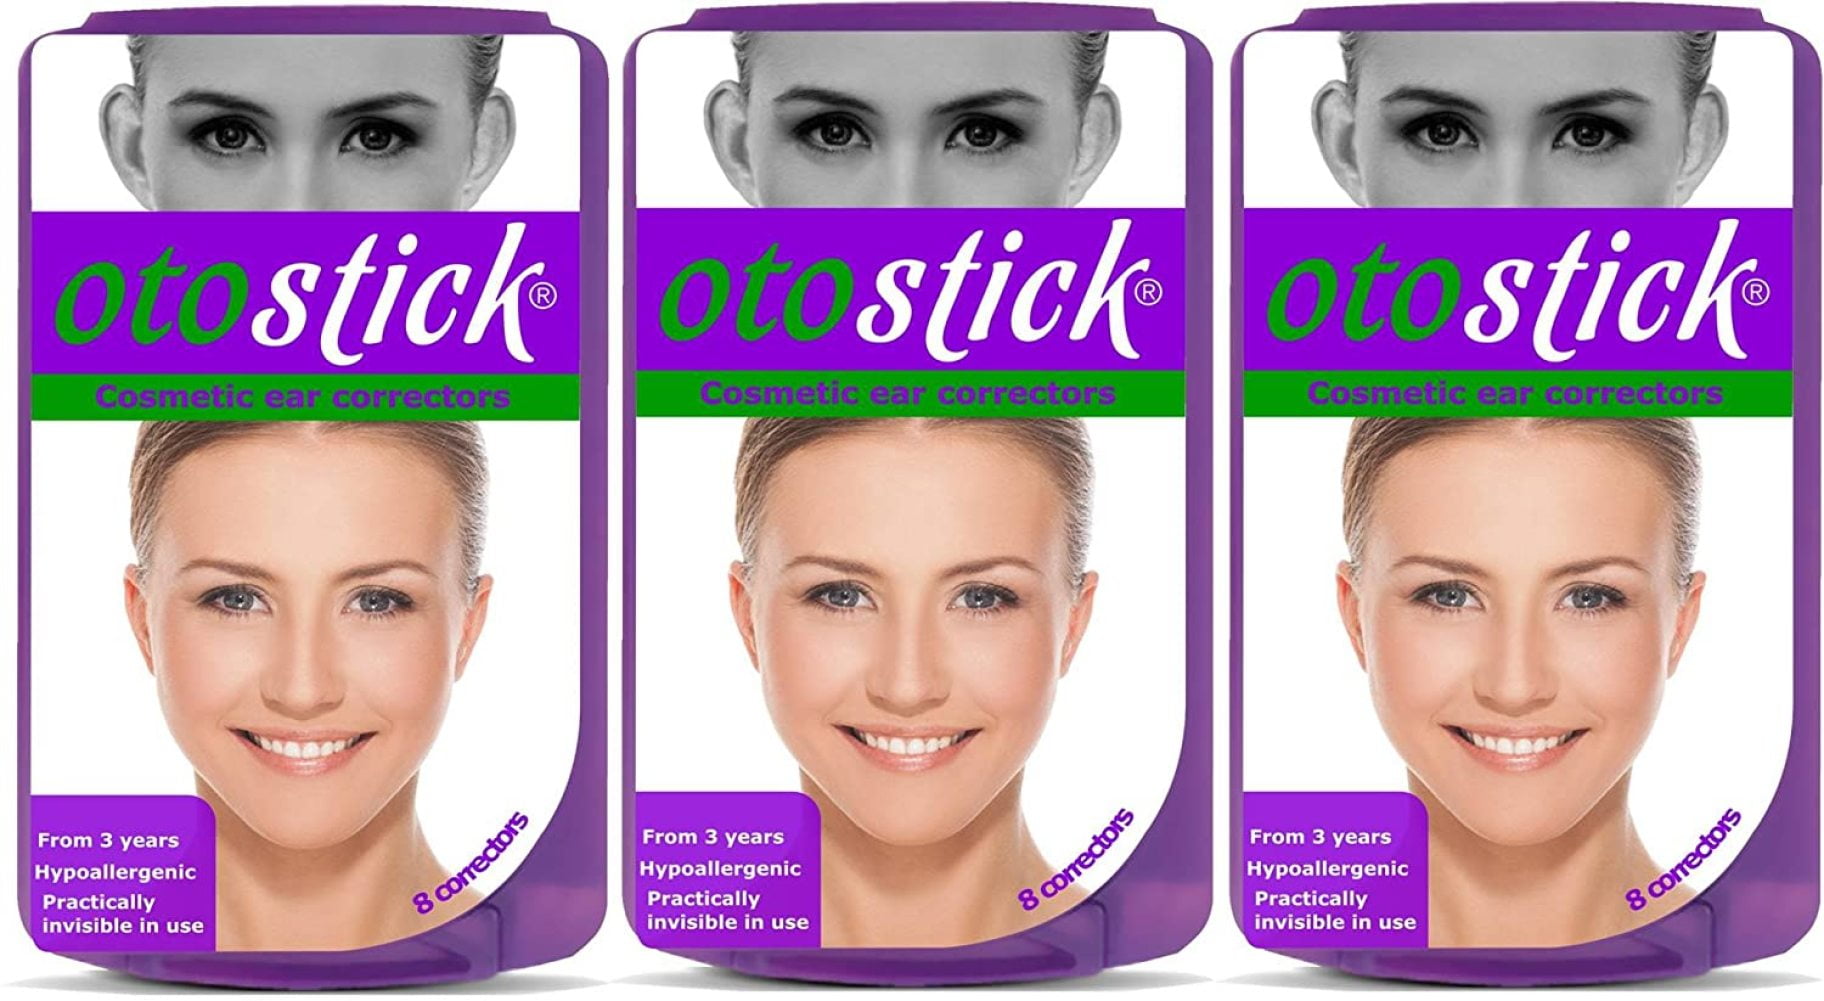 Pack 3x OTOSTICK EAR CORRECTOR 8 UDS. Total 24 Units. Free shipping!!!